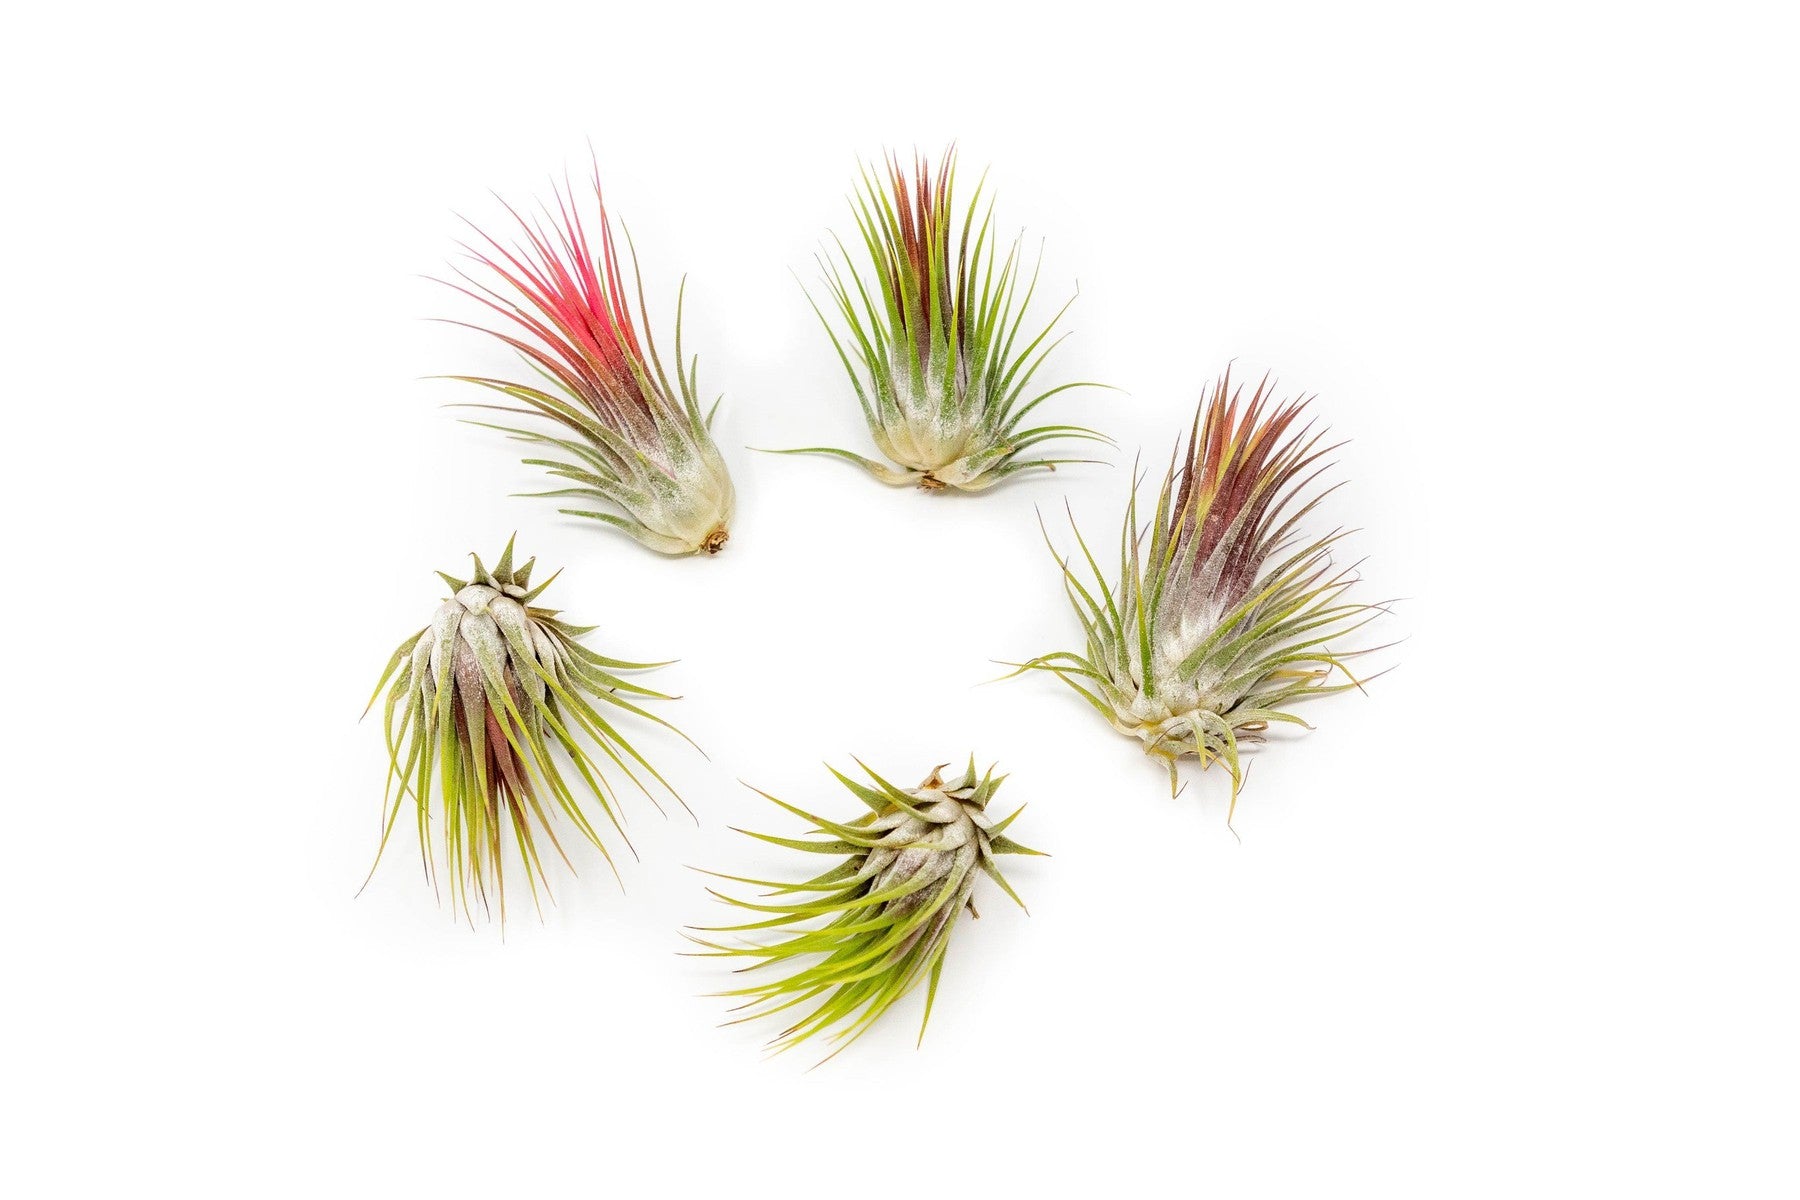 SALE - Tillandsia Ionantha Guatemala Air Plants - Set of 10, 20 or 50 Air Plants - 70% Off-airplant-The Succulent Source